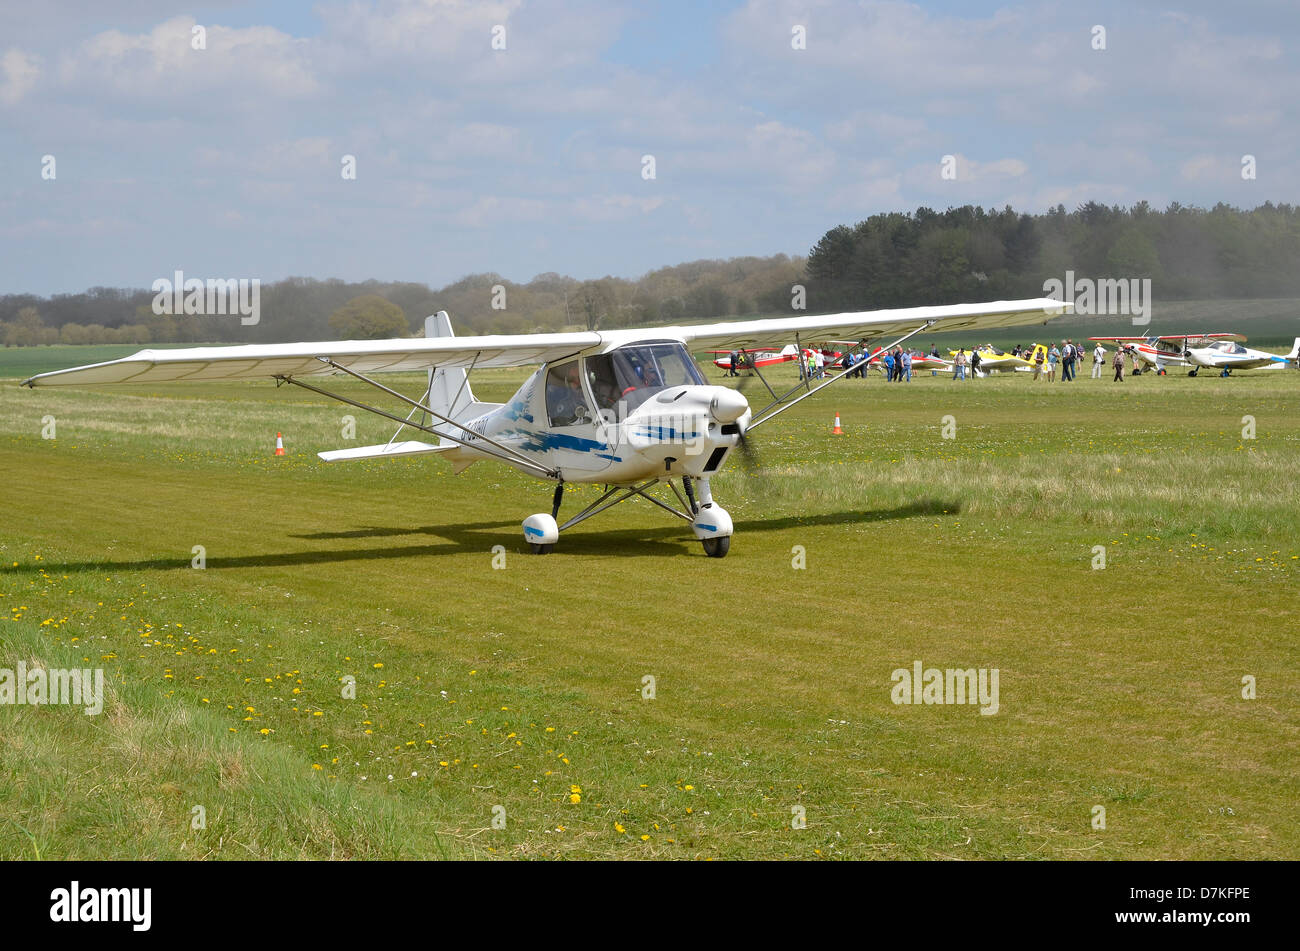 Ikarus C42 microlight aircraft registration G-CDRO taxiing after landing at Popham Airfield, Hampshire. Stock Photo